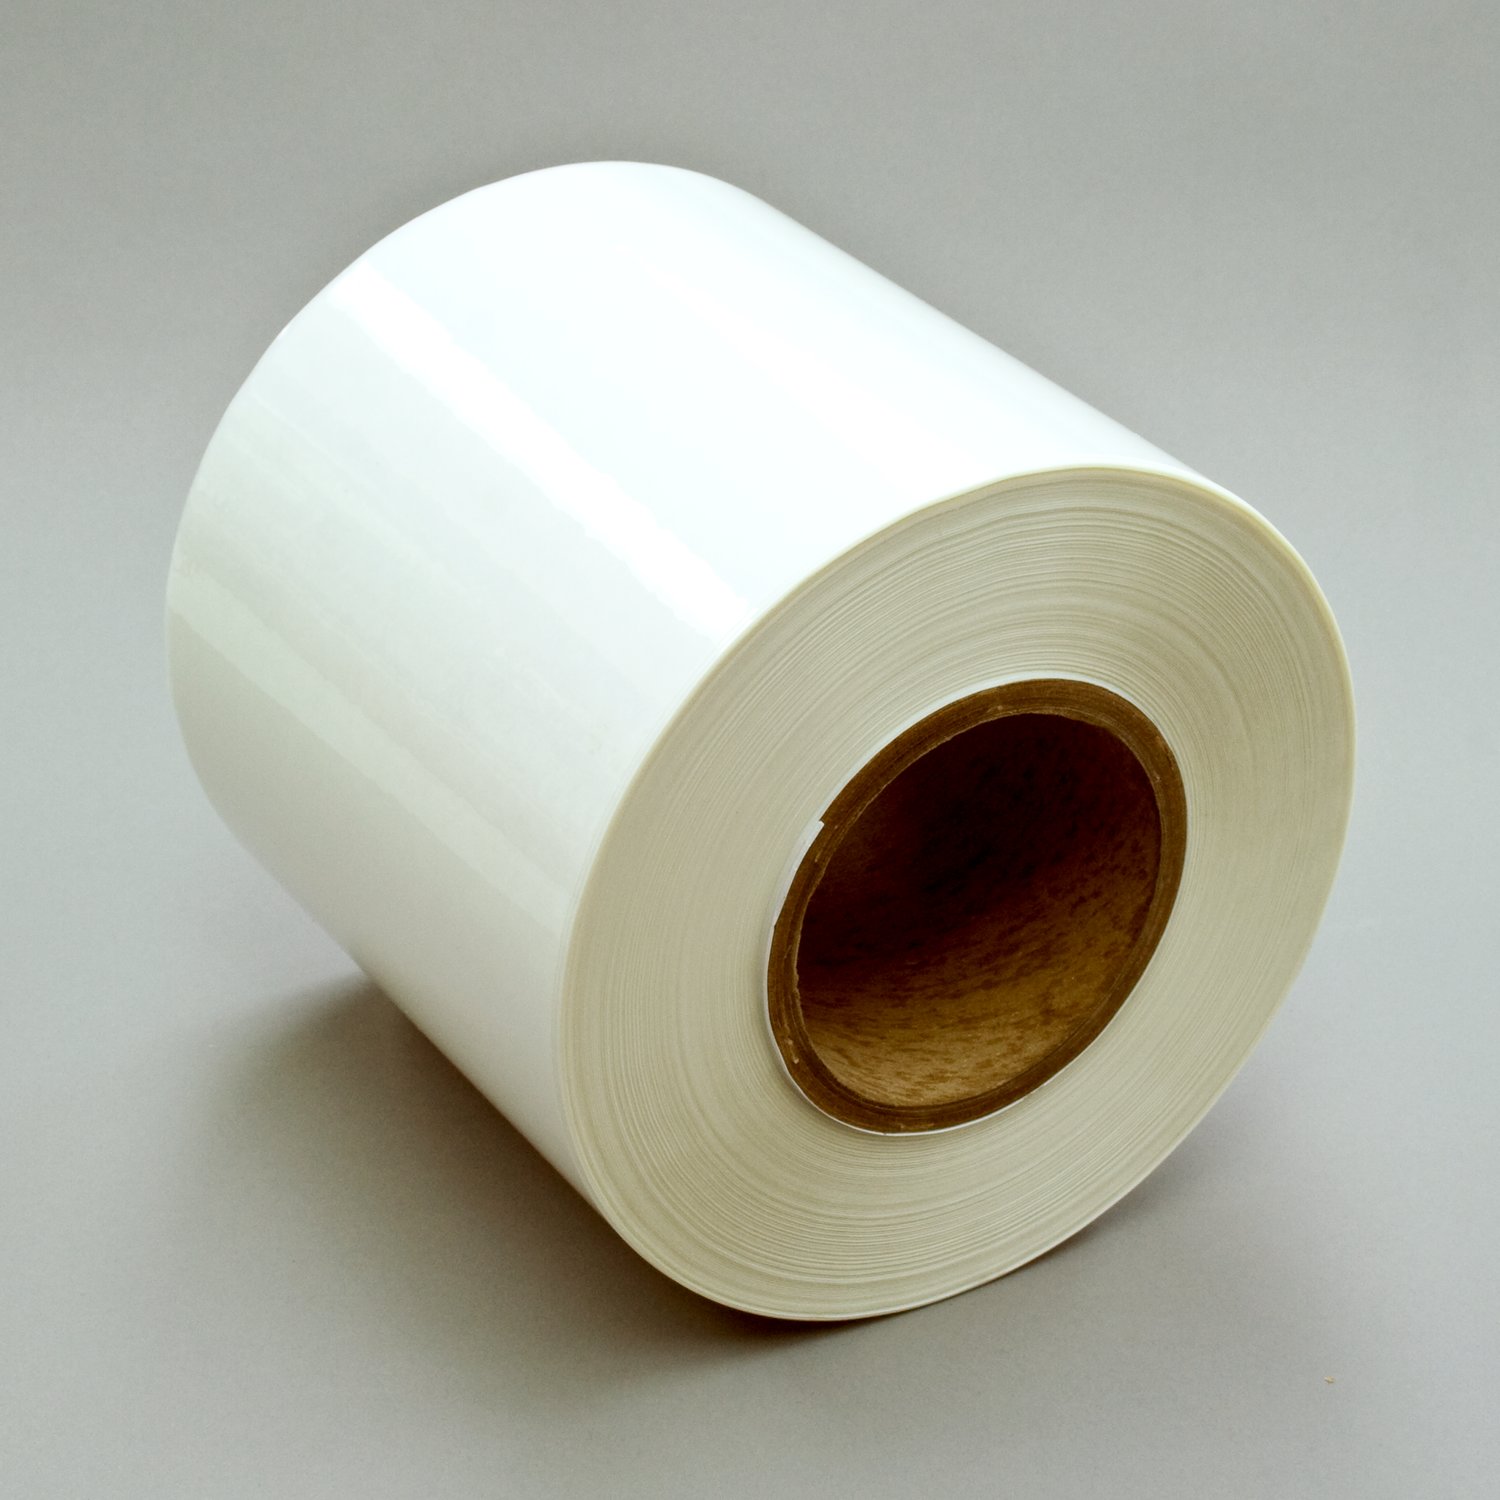 7000048466 - 3M Dot Matrix Label Material 7881, Clear Polyester Matte, 6 in x 1668
ft, 1 Roll/Case